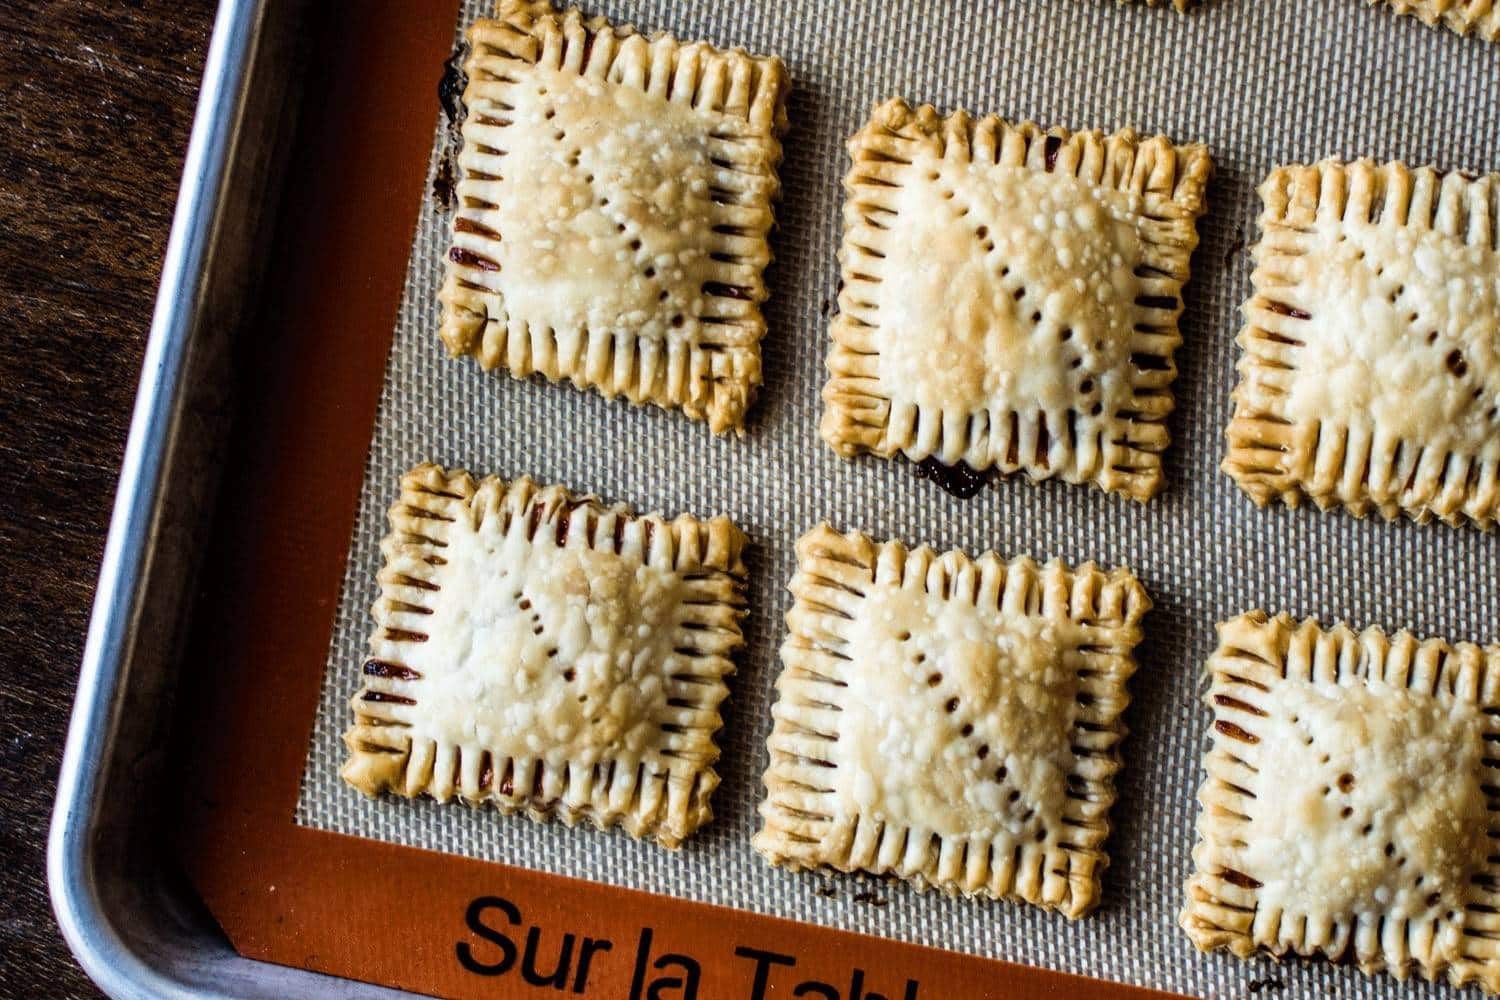 brunch recipes to try, homemade pop tarts